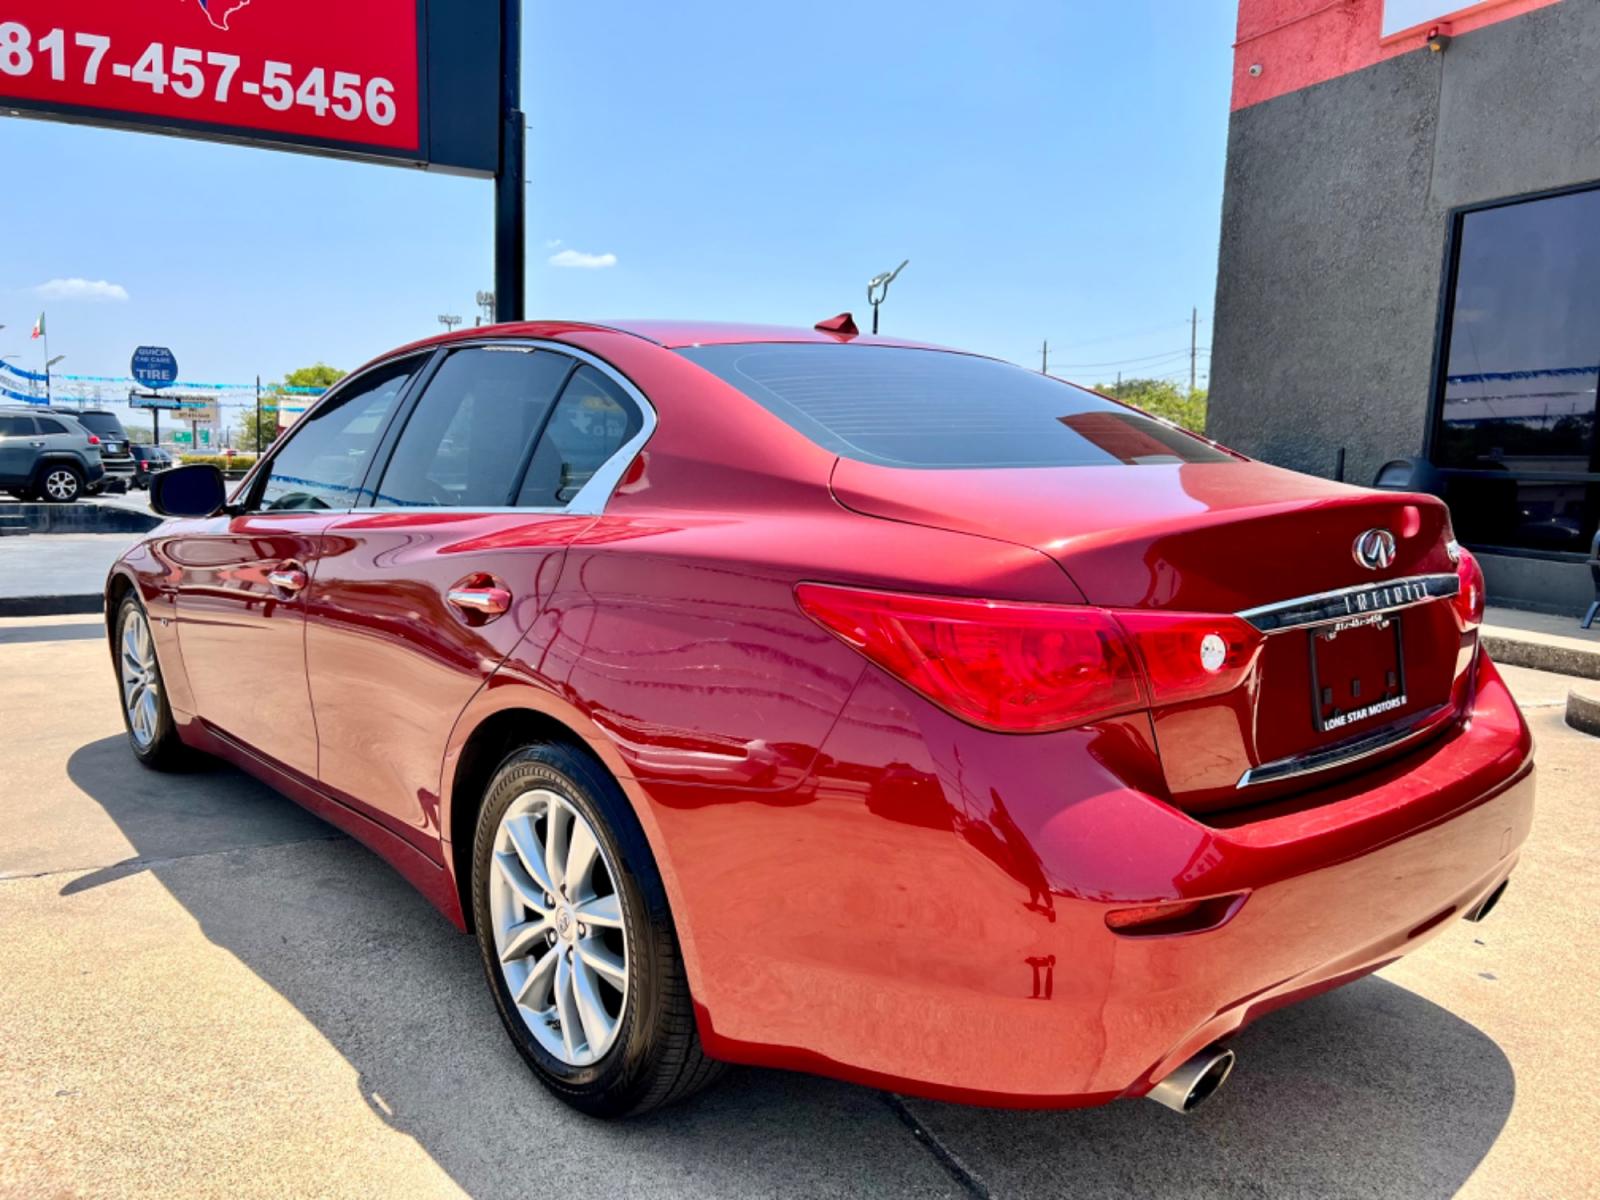 2014 RED INFINITI Q50 (JN1BV7AP9EM) , located at 5900 E. Lancaster Ave., Fort Worth, TX, 76112, (817) 457-5456, 0.000000, 0.000000 - This is a 2014 INFINITI Q50 4 DOOR SEDAN that is in excellent condition. There are no dents or scratches. The interior is clean with no rips or tears or stains. All power windows, door locks and seats. Ice cold AC for those hot Texas summer days. It is equipped with a CD player, AM/FM radio, AUX por - Photo #4